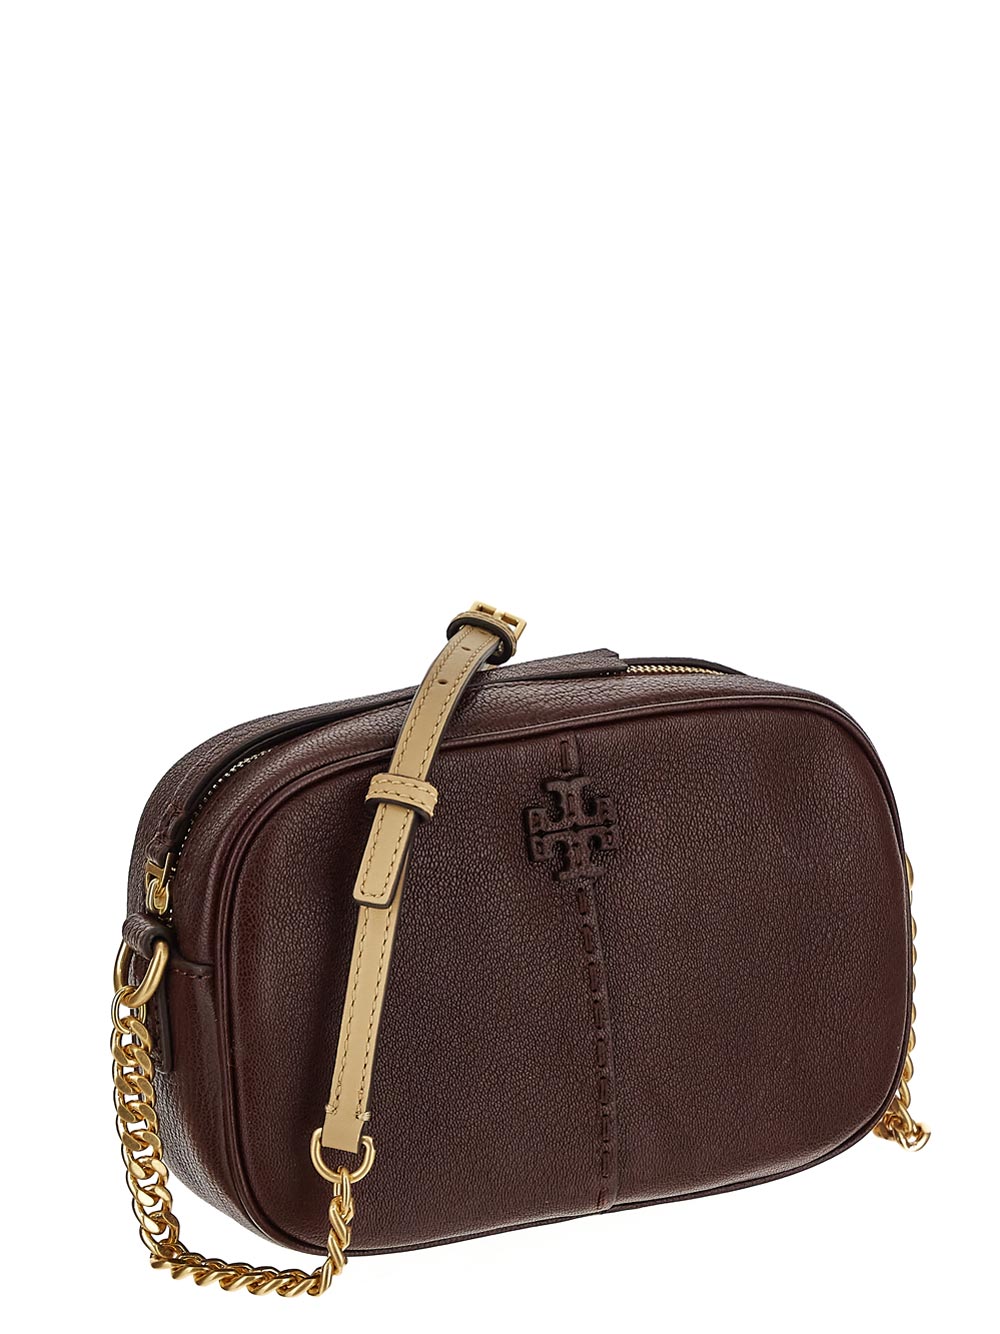 Tory Burch Mcgraw Textured Leather Camera Bag